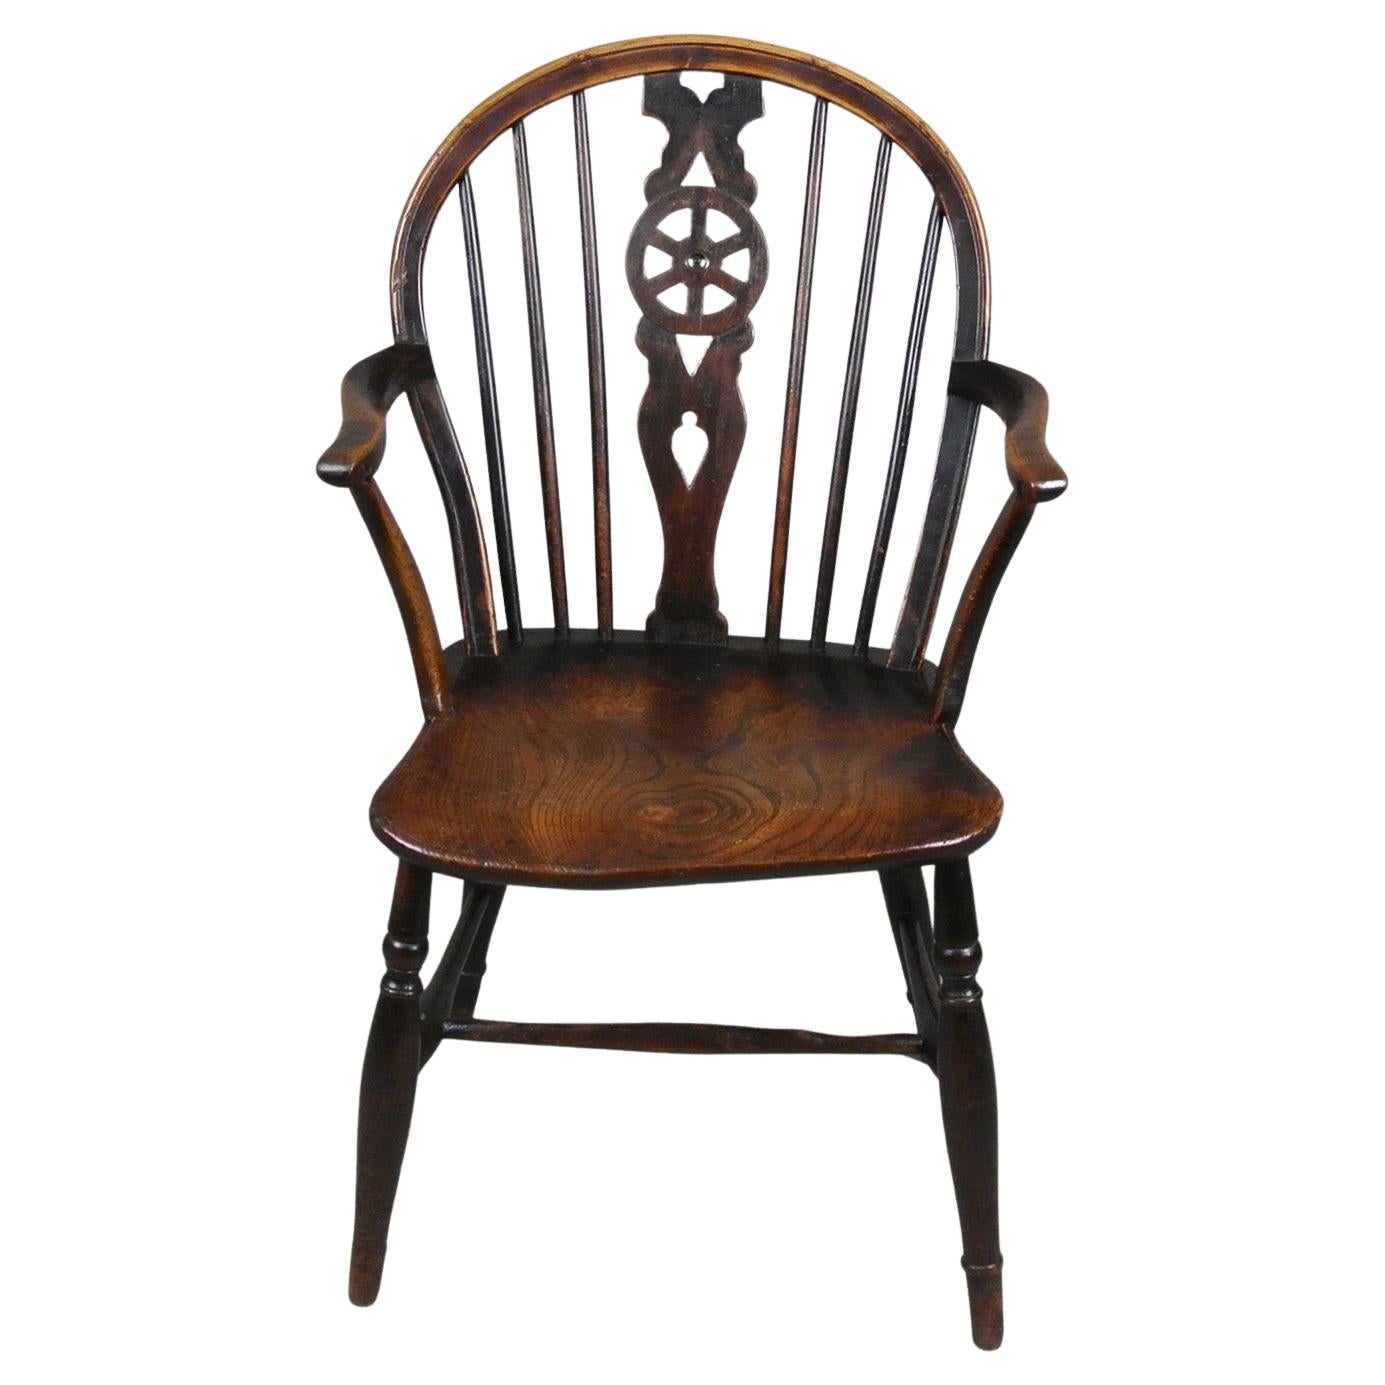 Early Thames Valley Windsor Wheel Back Chair c. 1800